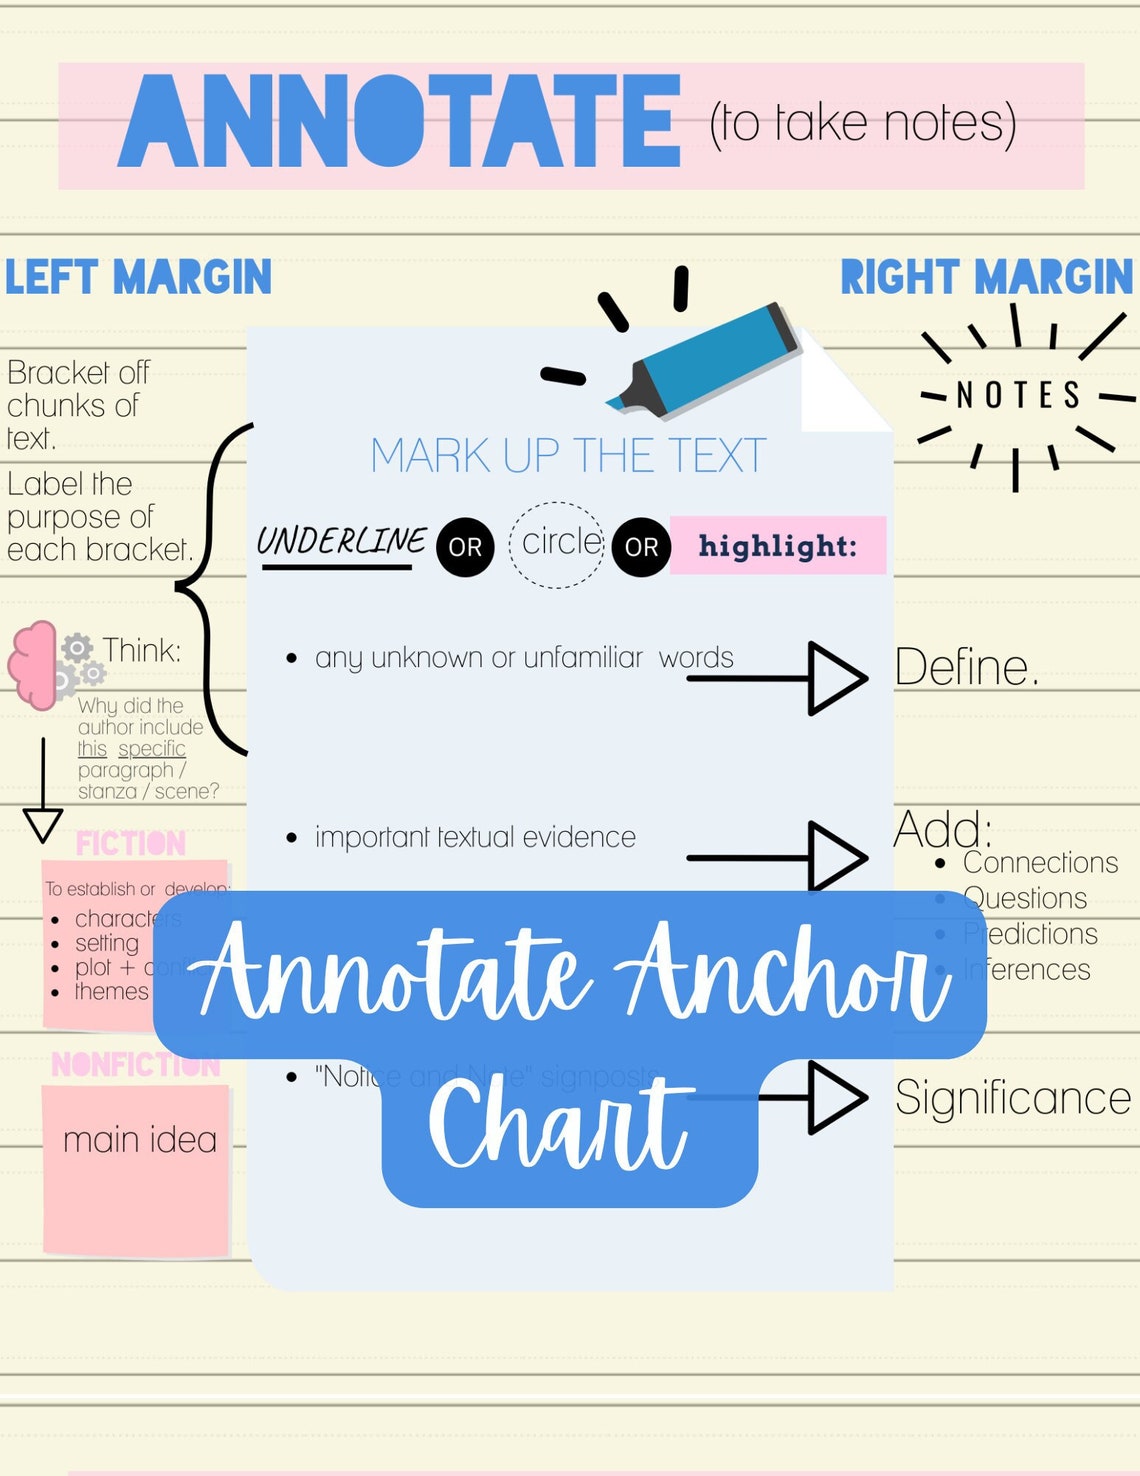 annotation by definition